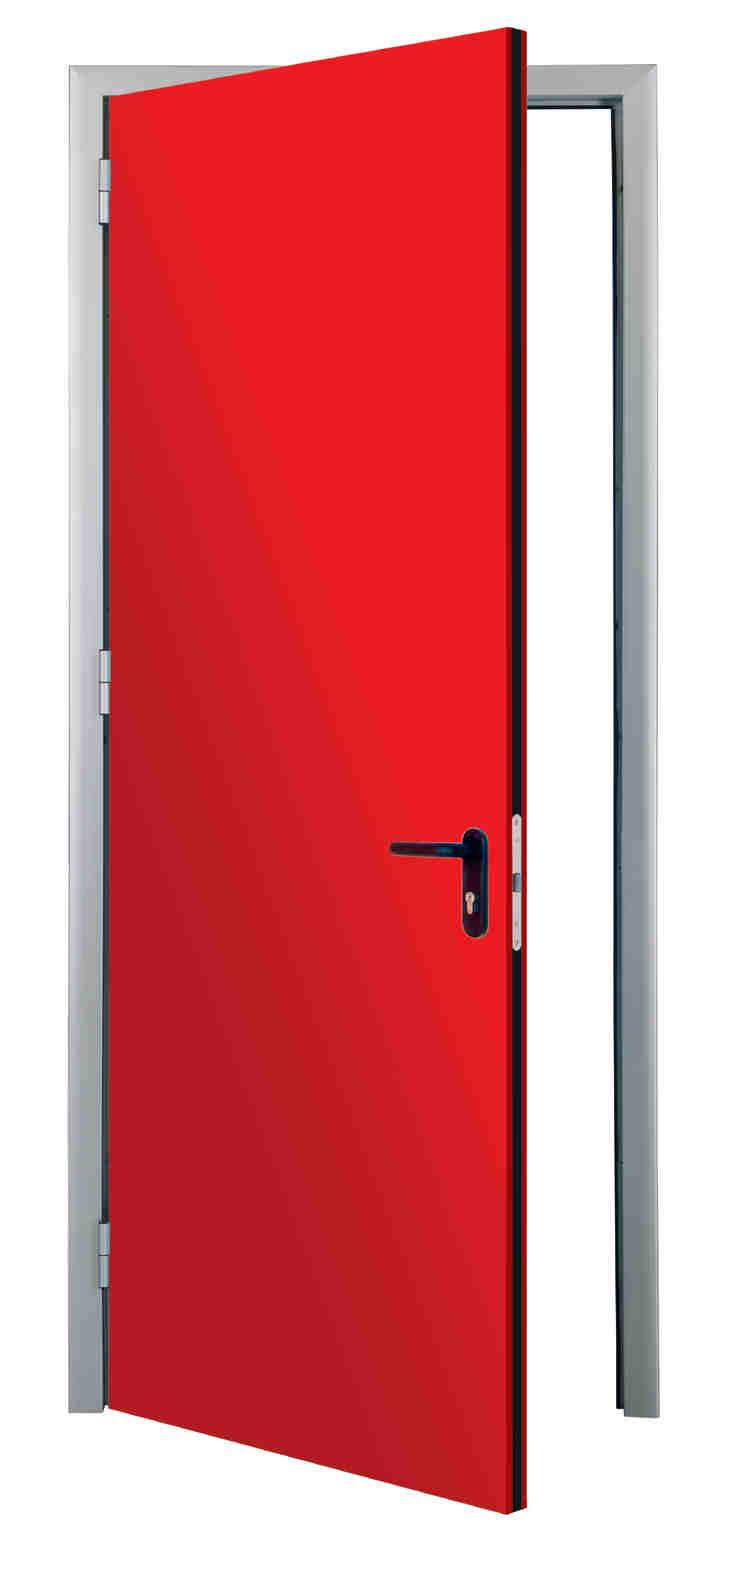 The Asia door REI 30 has been developed to satisfy the needs of healthcare facilities and hotels.